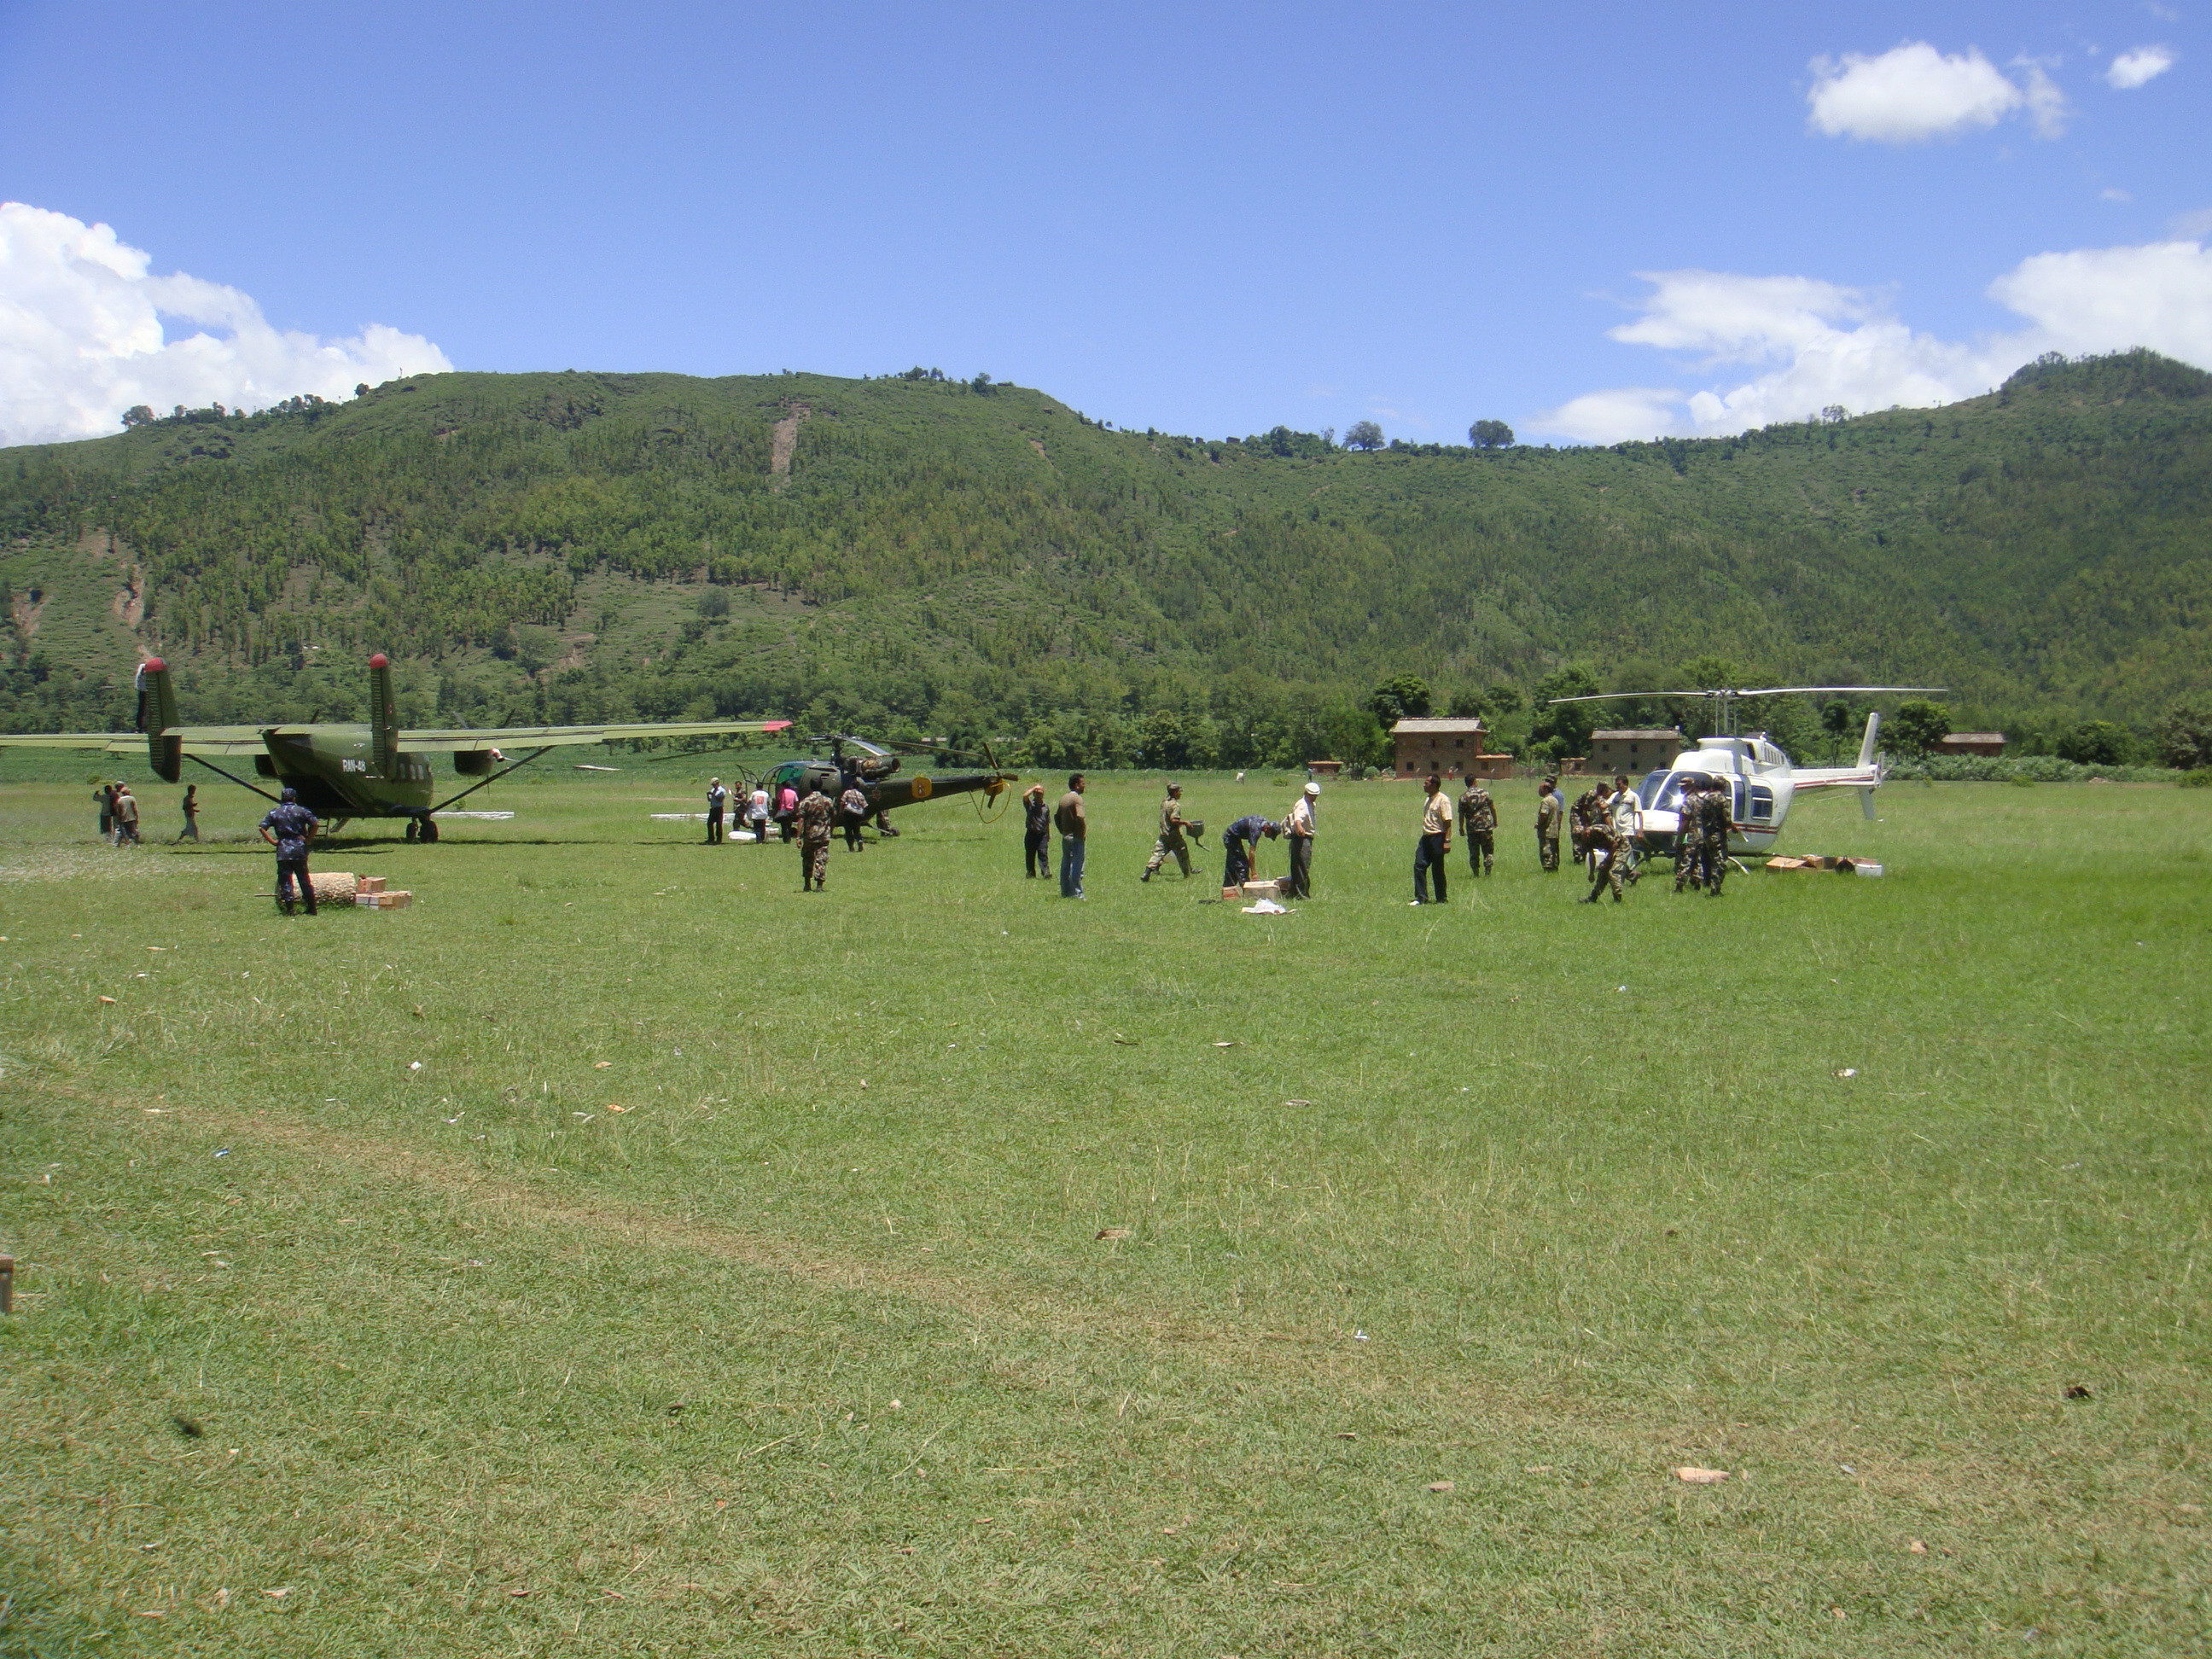 Relief and rescue workers unloading essential medical supplies at the Chaurjhari airstrip, Rukum in response to the diarrhea outbreak in Jajarkot during 2009 monsoon.